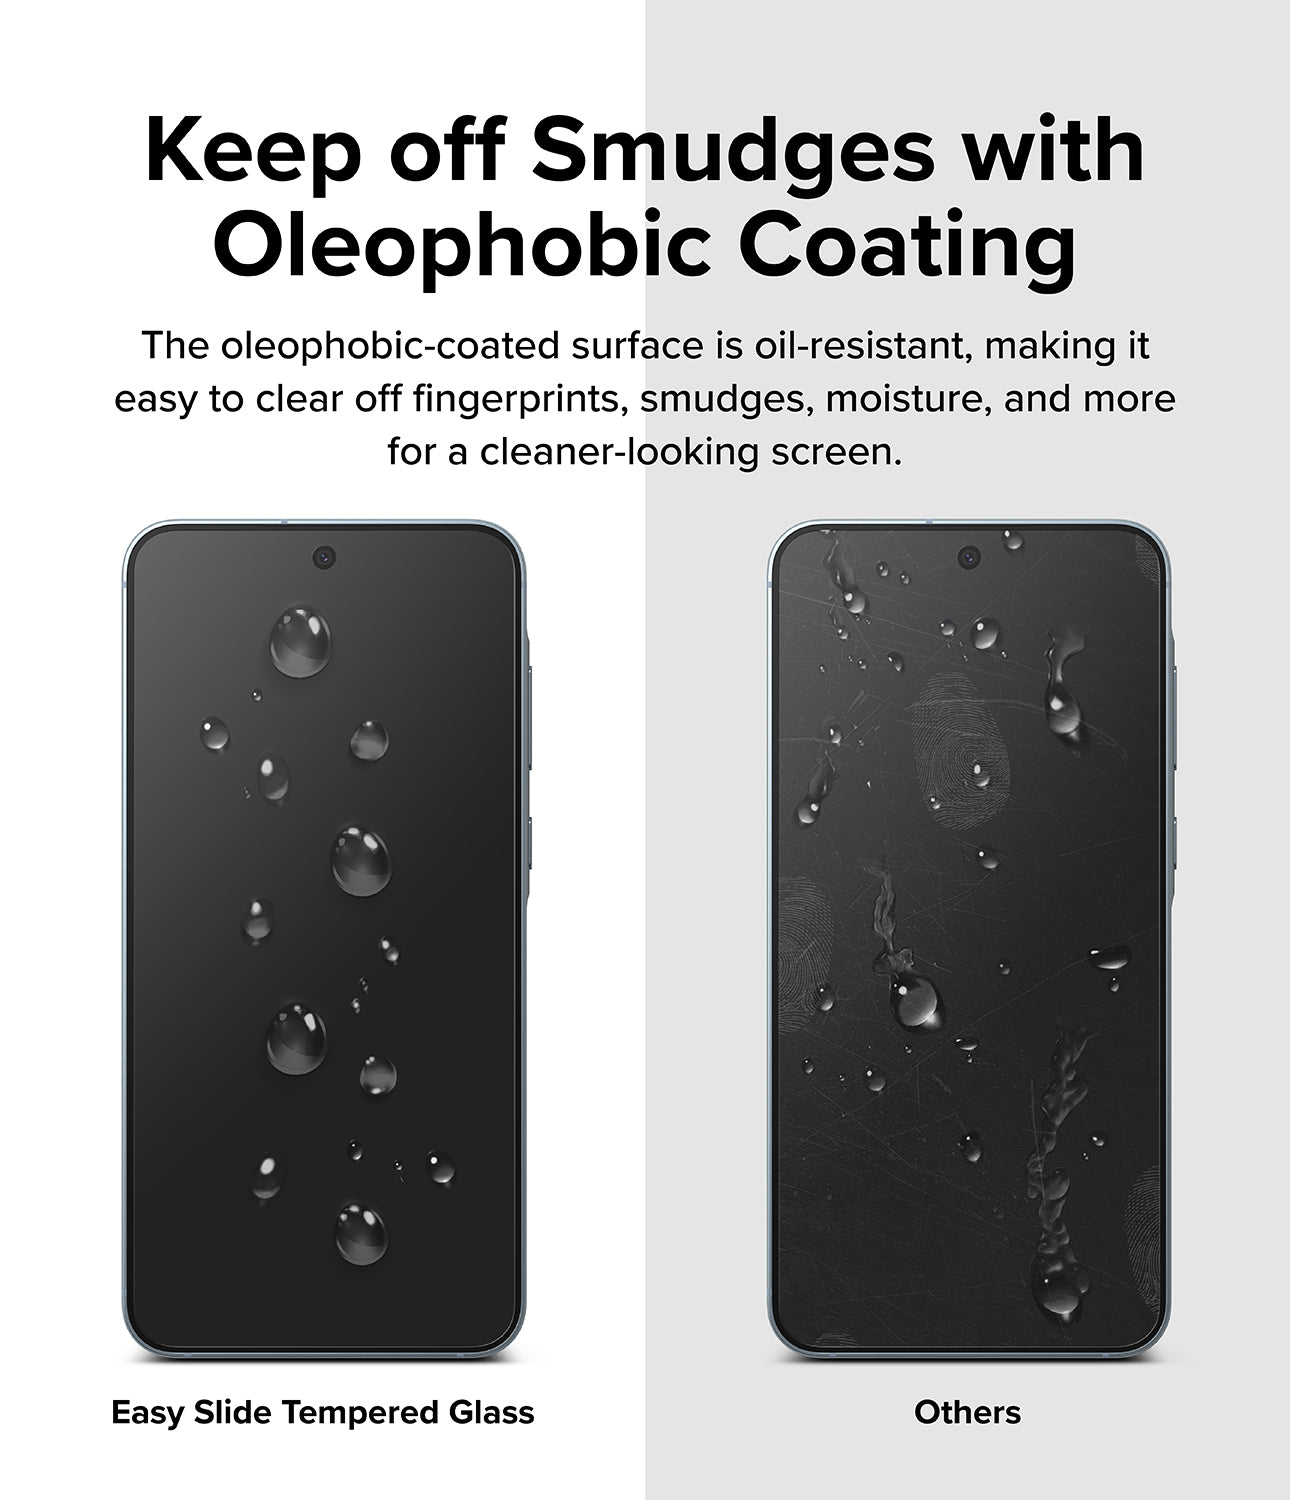 Galaxy A35 Screen Protector | Easy Slide Tempered Glass - Keep off Smudges with Oleophobic Coating. The oleophobic-coated surface is oil-resistant, making it easy to clear off fingerprints, smudges, moisture, and more for a cleaner-looking screen.